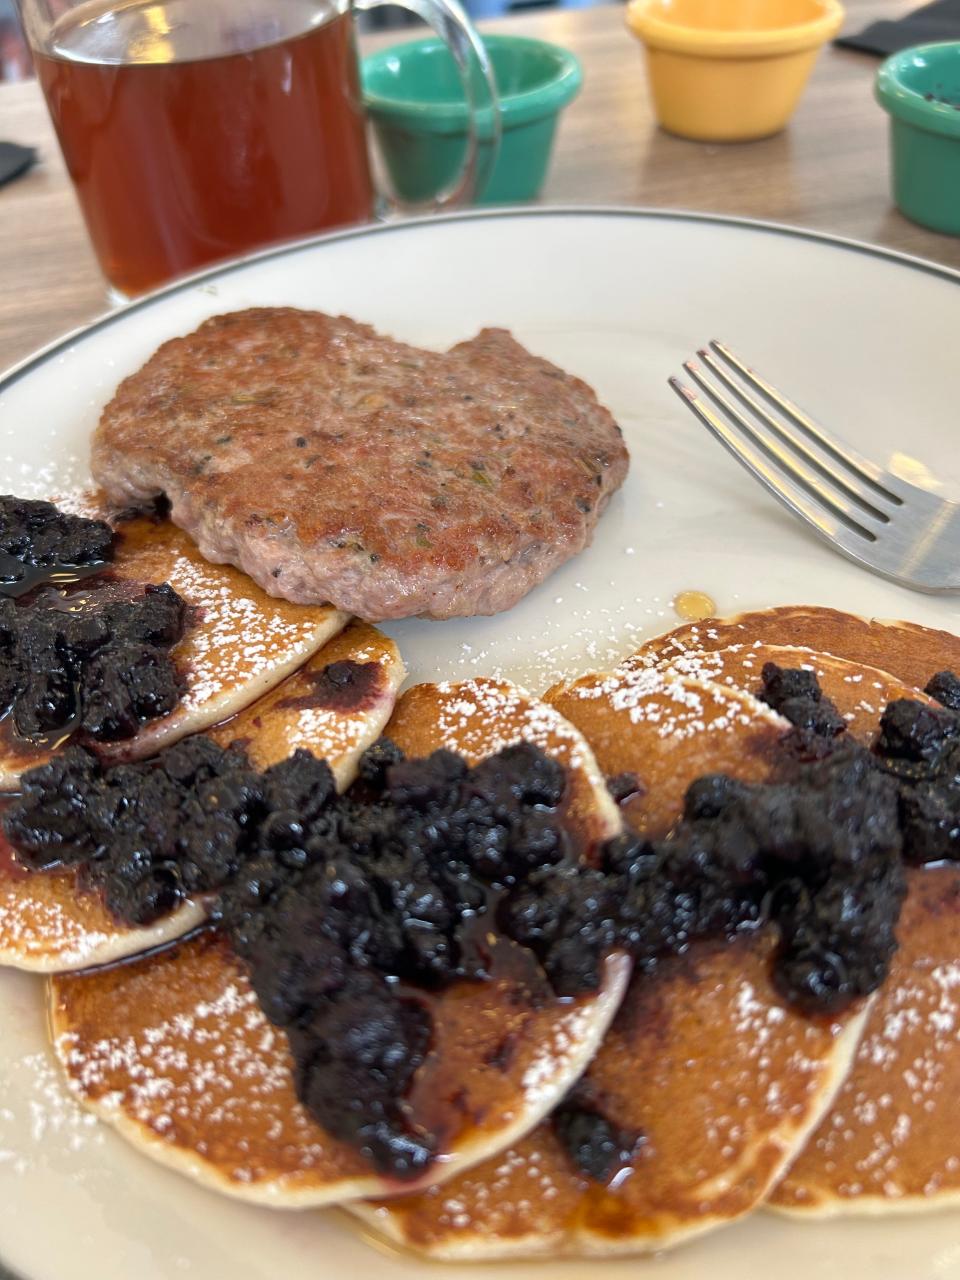 Silver dollar pancakes with Ohio maple syrup, elderberry compote and sausage at TUSK diner in Barberton.